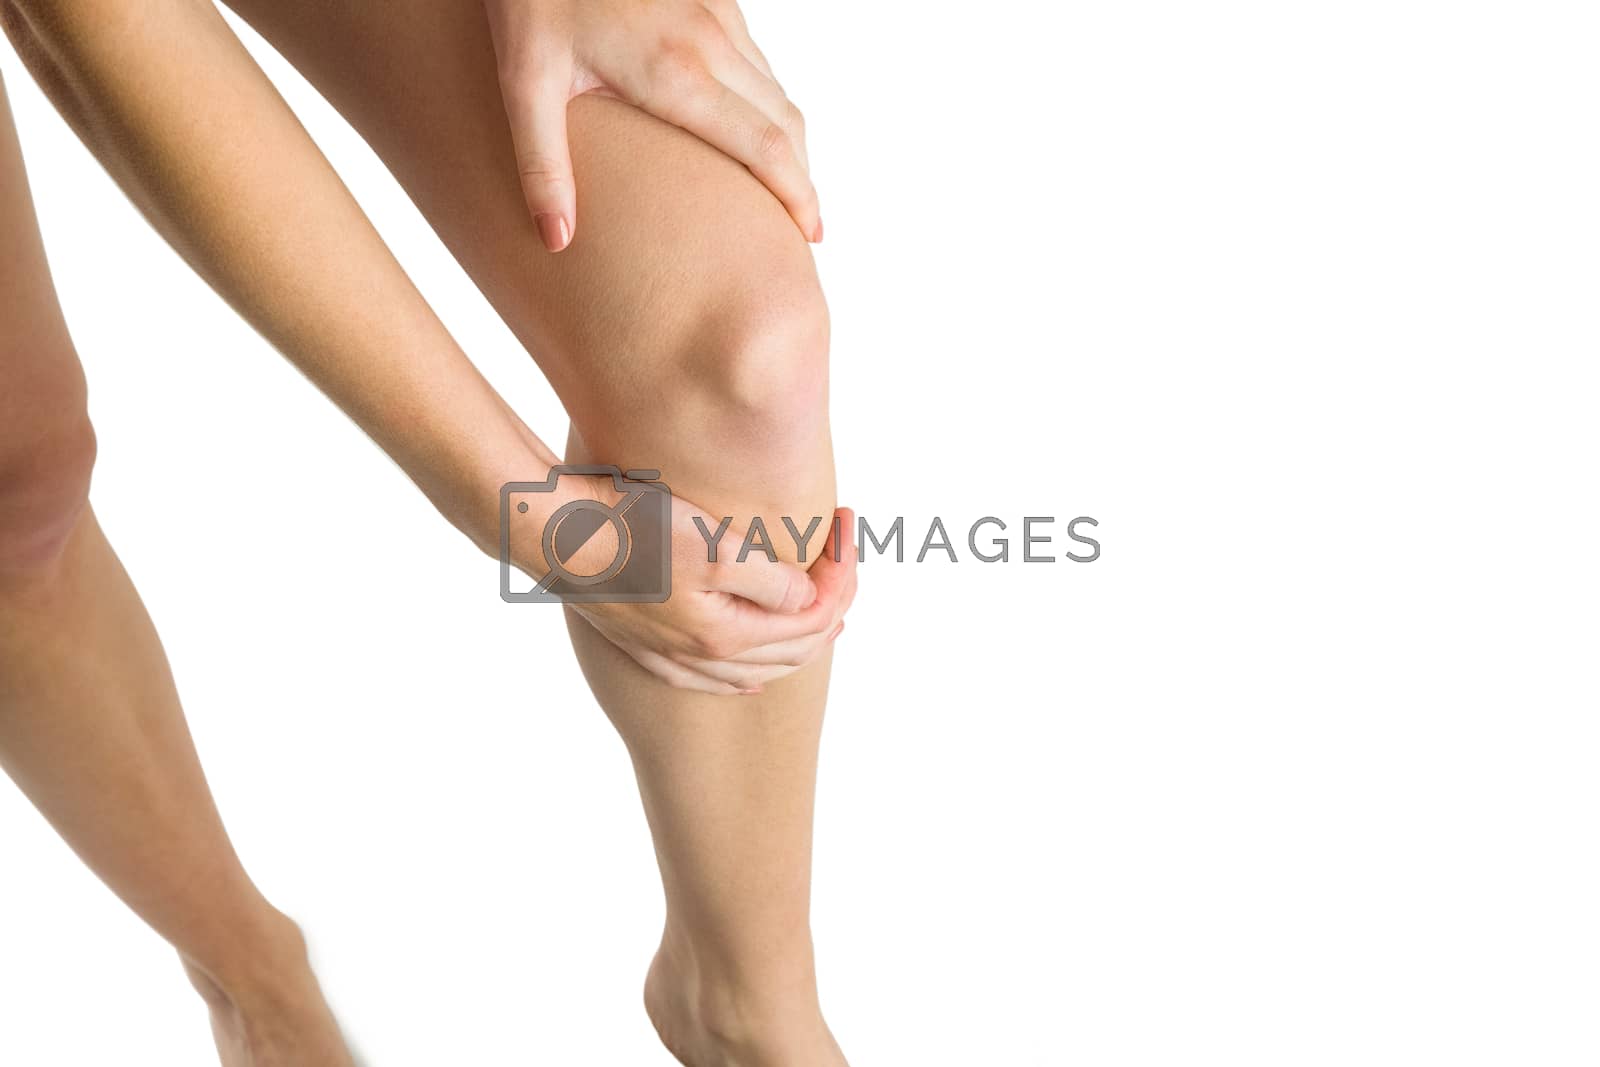 Royalty free image of Woman with leg injury by Wavebreakmedia